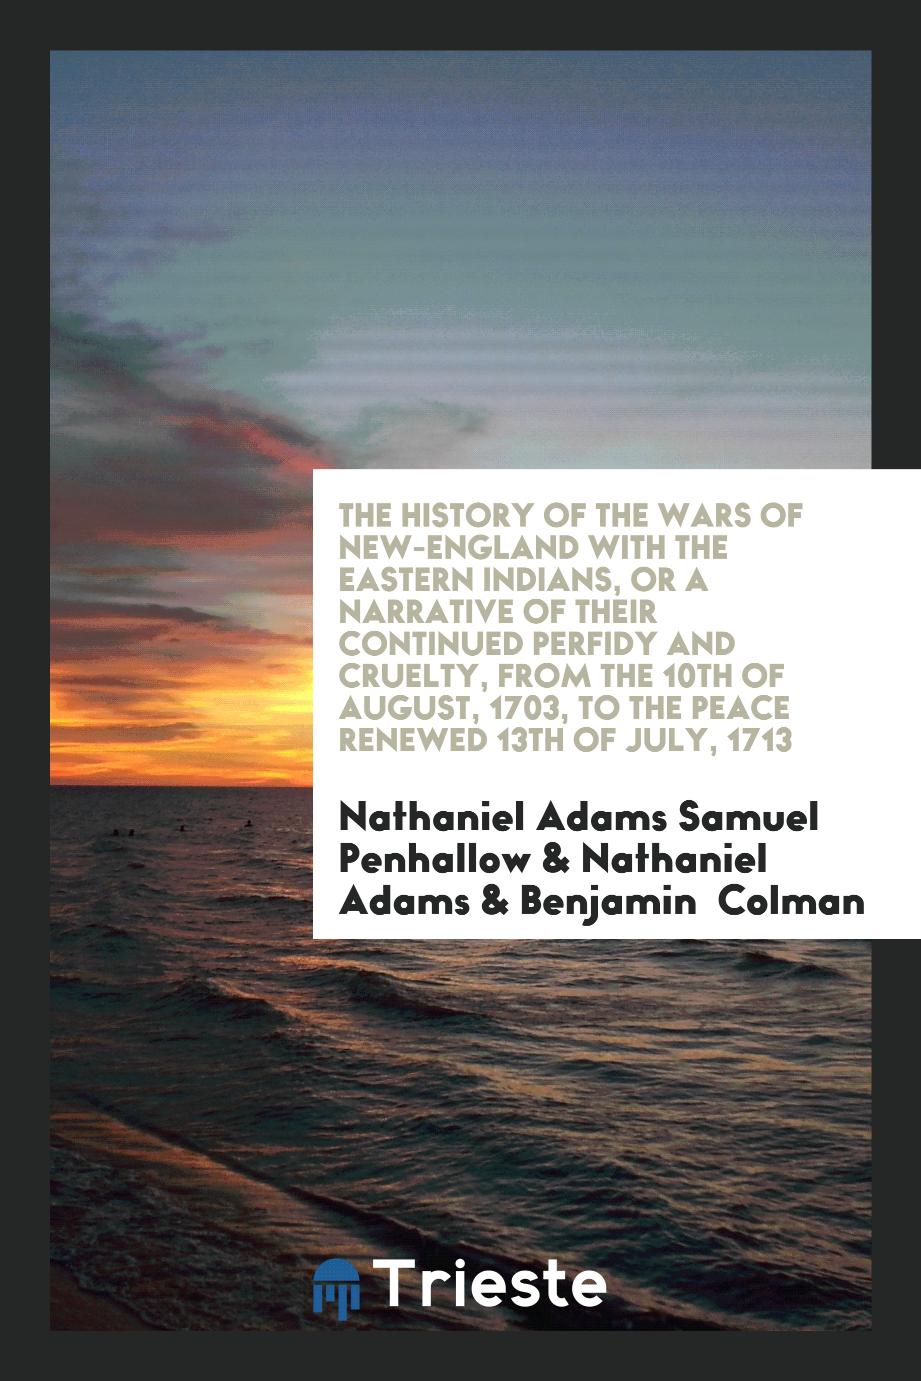 The History of the Wars of New-England with the Eastern Indians, or a Narrative of Their Continued Perfidy and Cruelty, from the 10th of August, 1703, to the Peace Renewed 13th of July, 1713